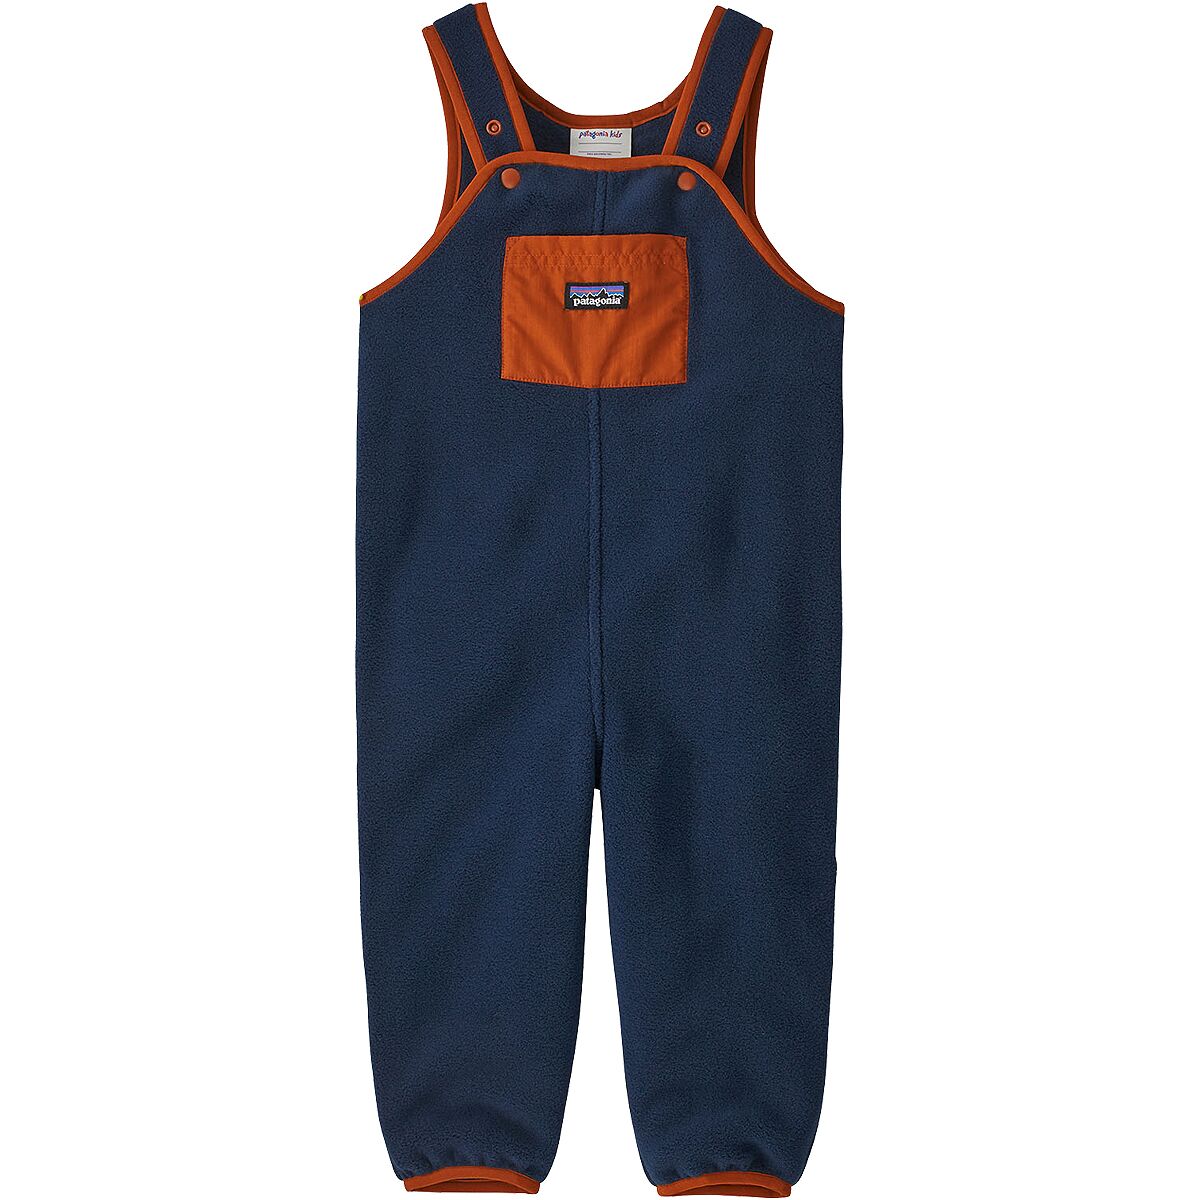 Patagonia Synchilla Overall - Infants'